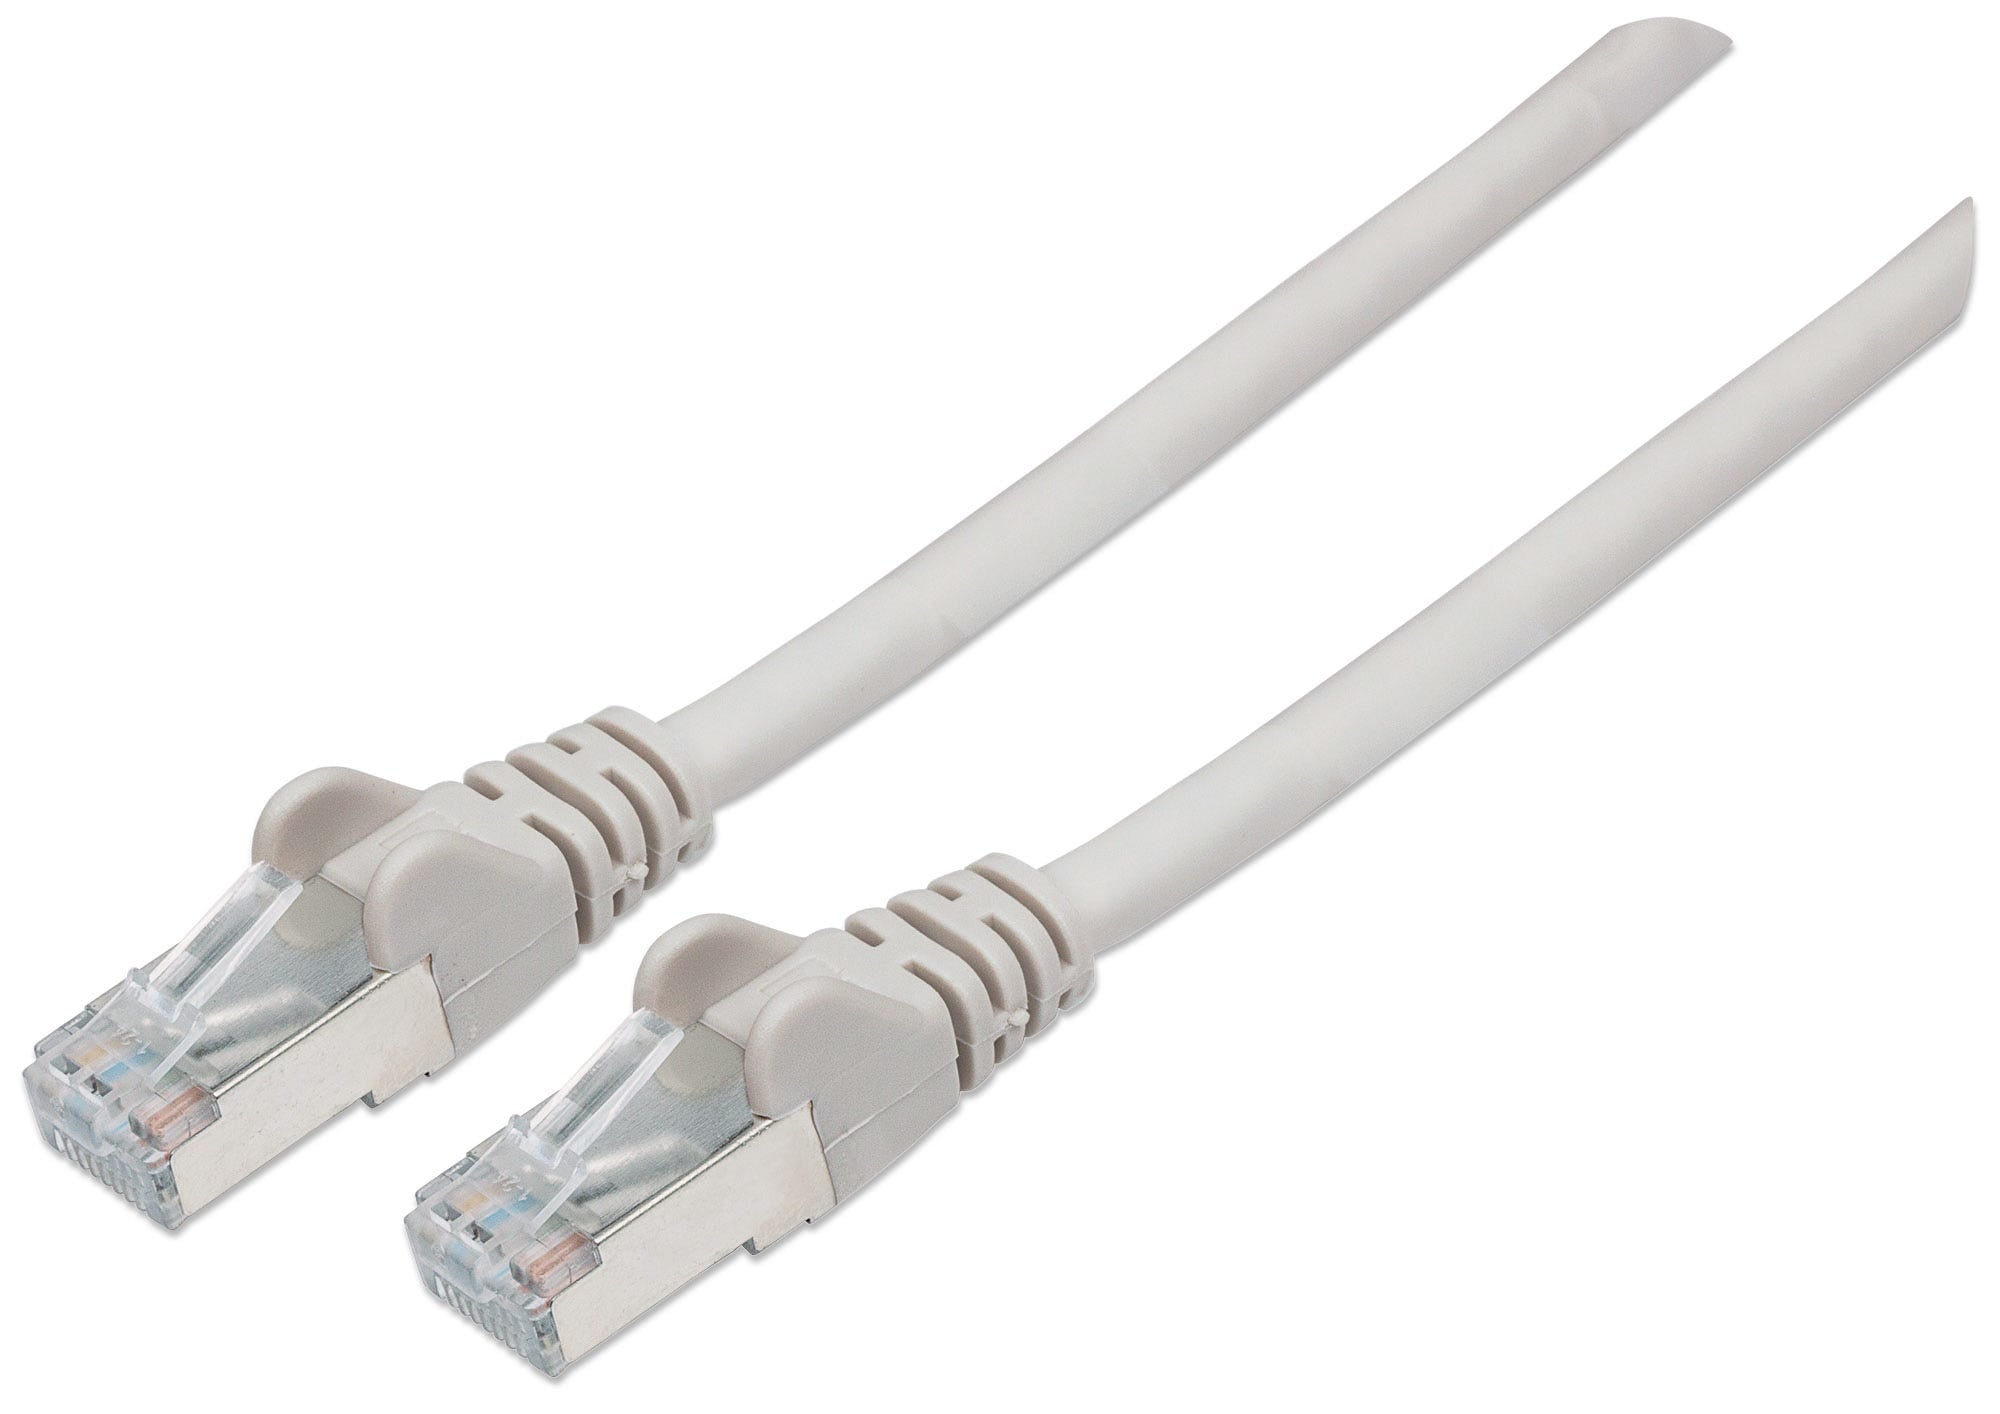 Intellinet Network Patch Cable, Cat6, 0.5m, Grey, Copper, S/FTP, LSOH / LSZH, PVC, RJ45, Gold Plated Contacts, Snagless, Booted, Lifetime Warranty, Polybag